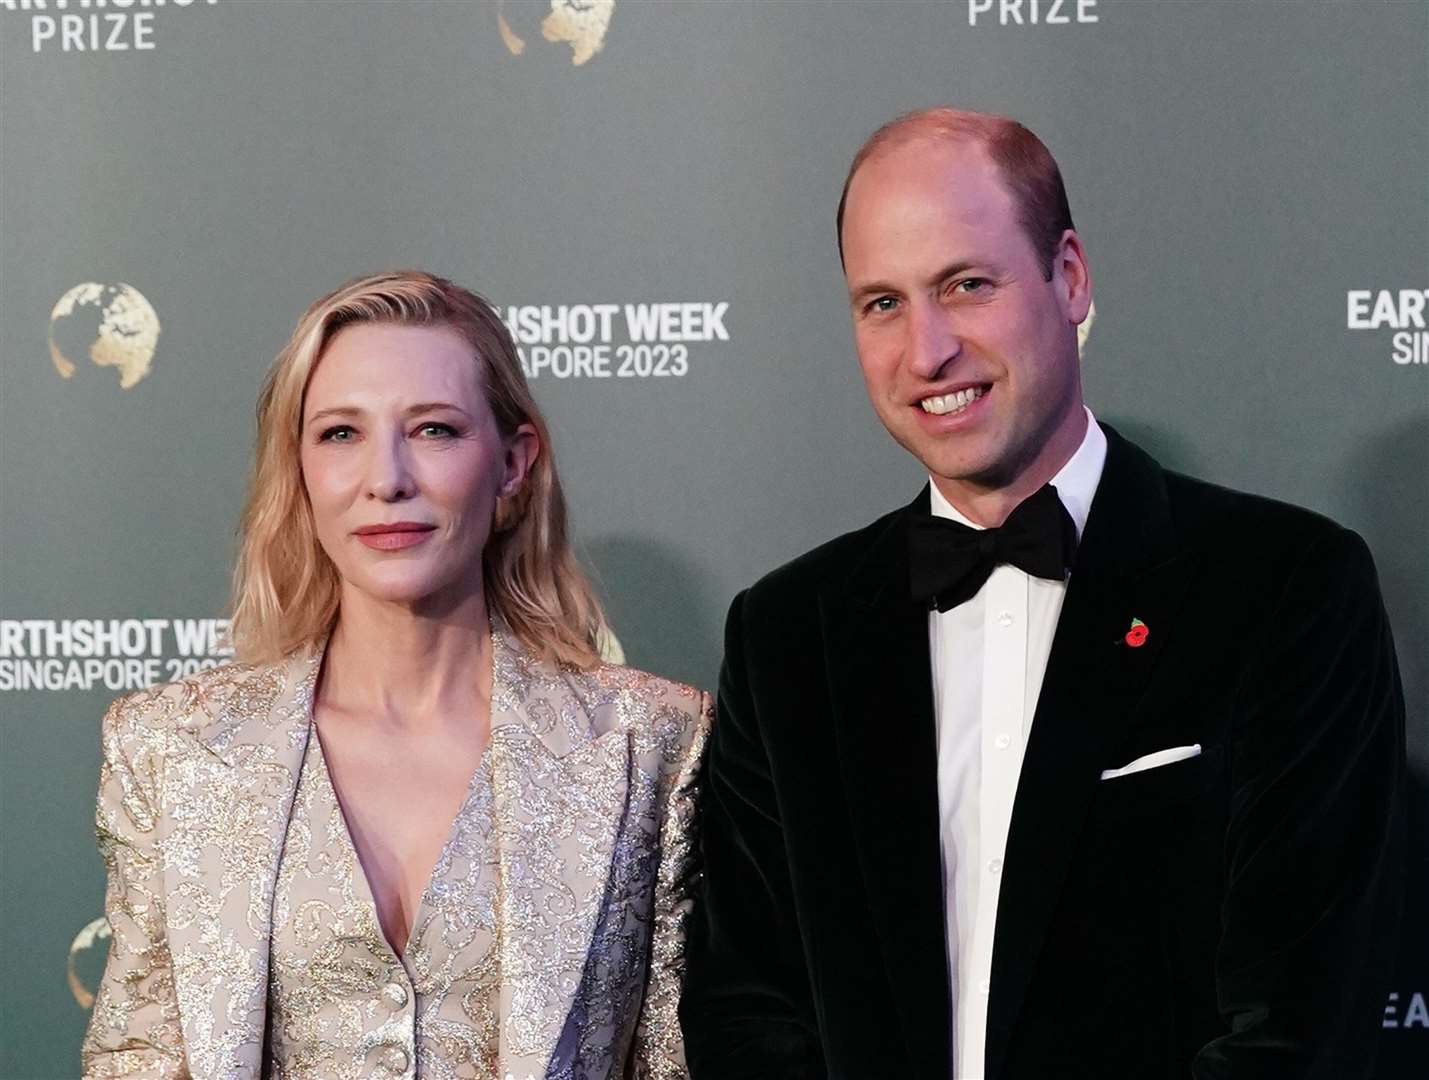 Cate Blanchett with the Prince of Wales in Singapore for the 2023 Earthshot Prize ceremony (Jordan Pettitt/PA)